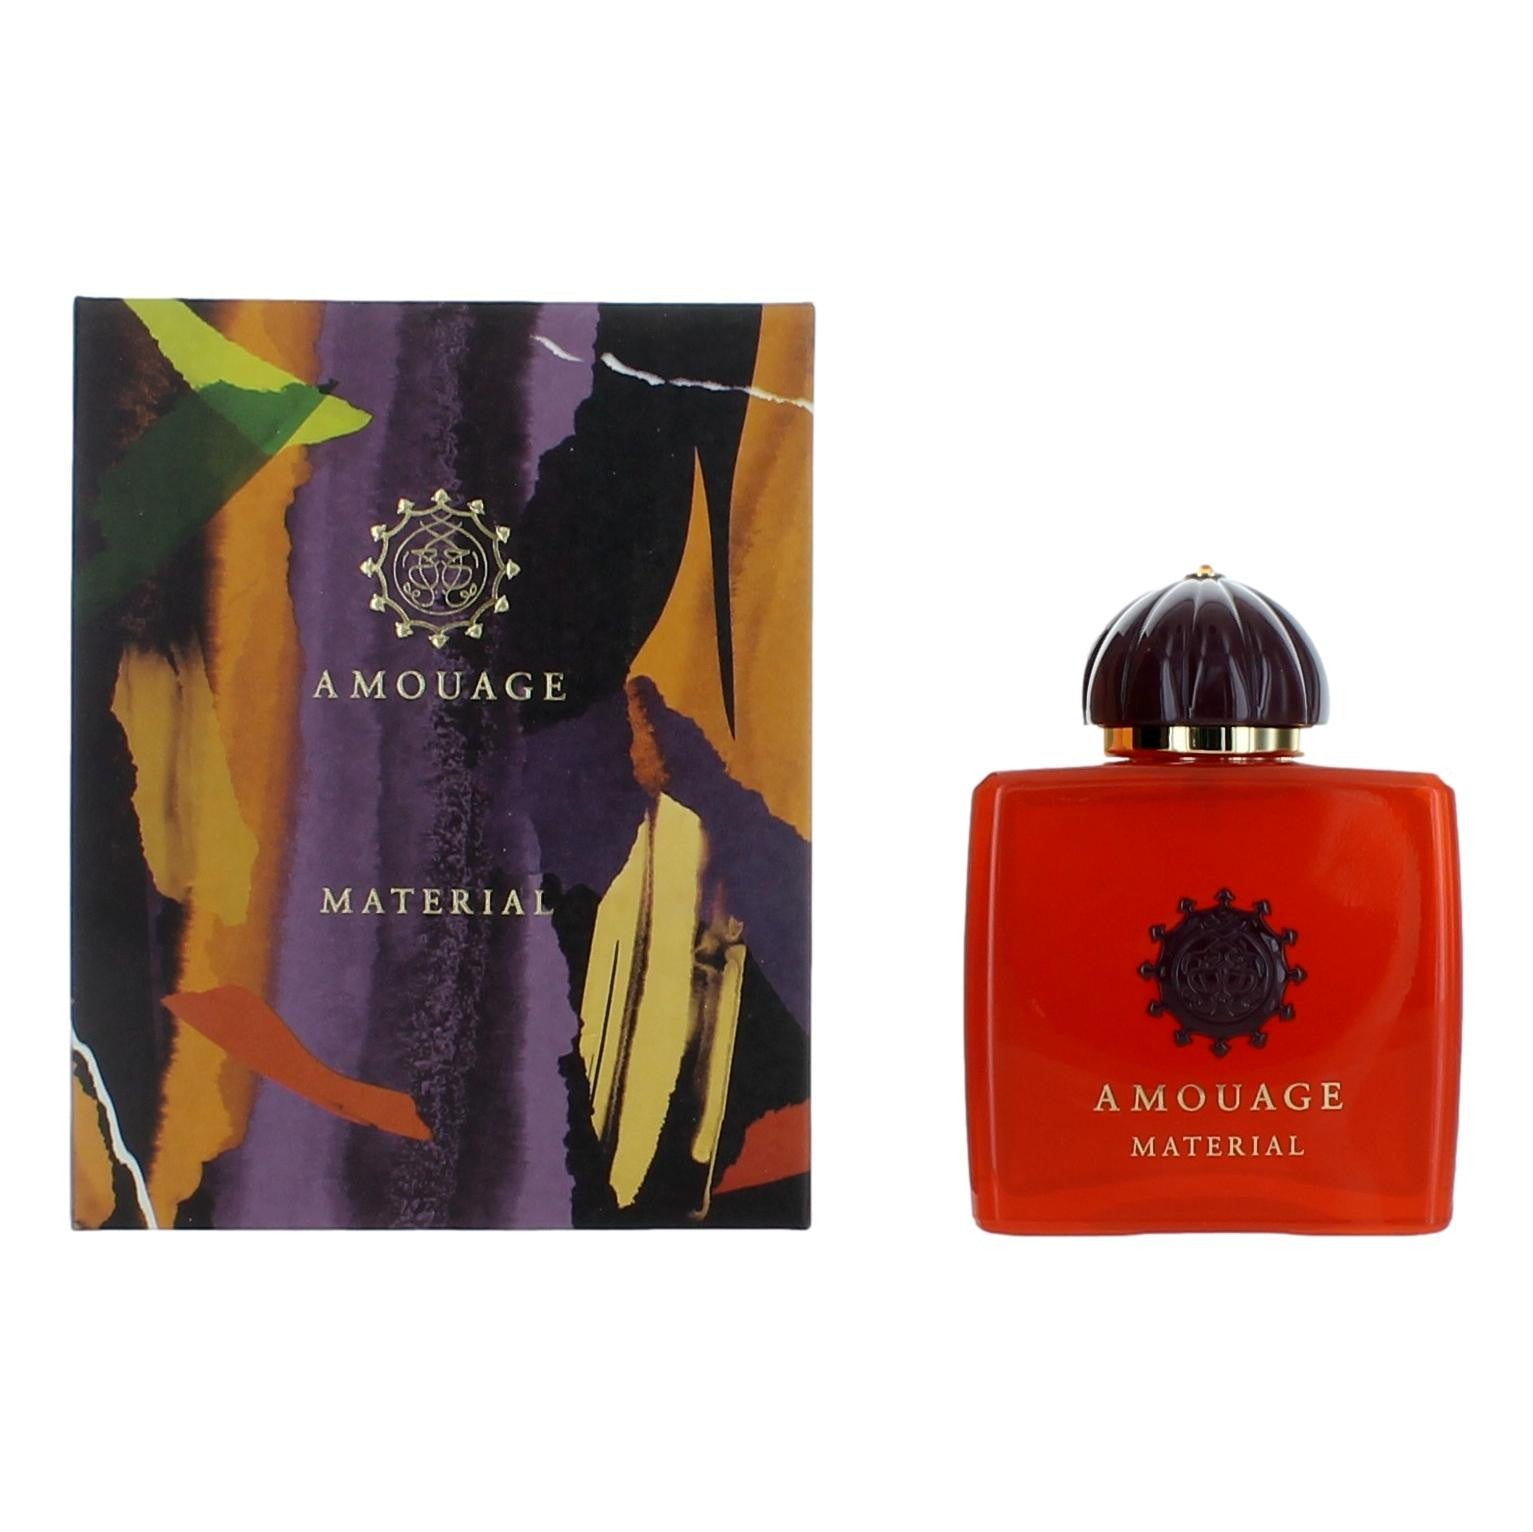 Material by Amouage, 3.4 oz EDP Spray for Women